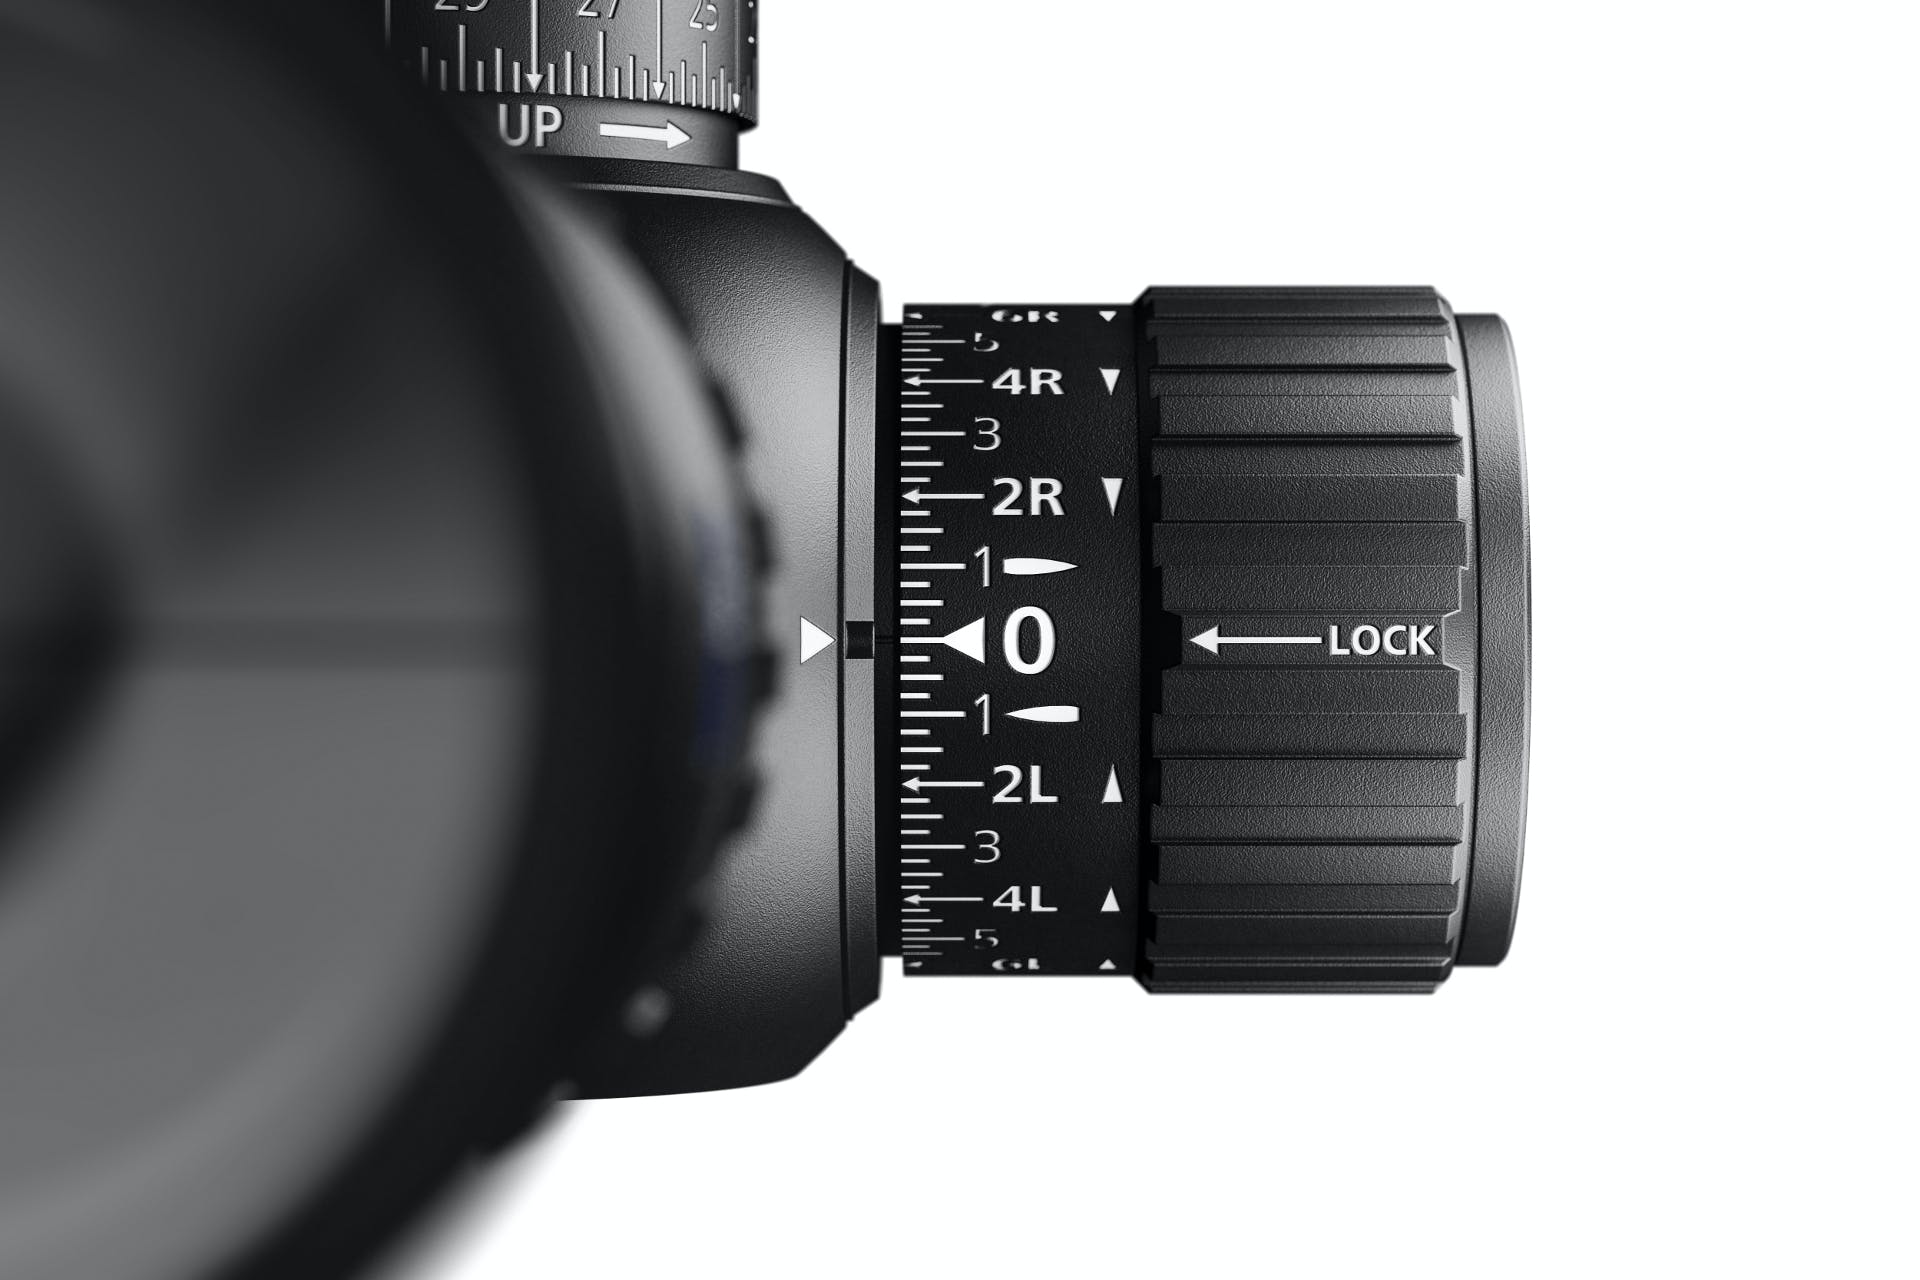 zeiss-lrp-s5-318-50-product-08.ts-1620390018945.jpg